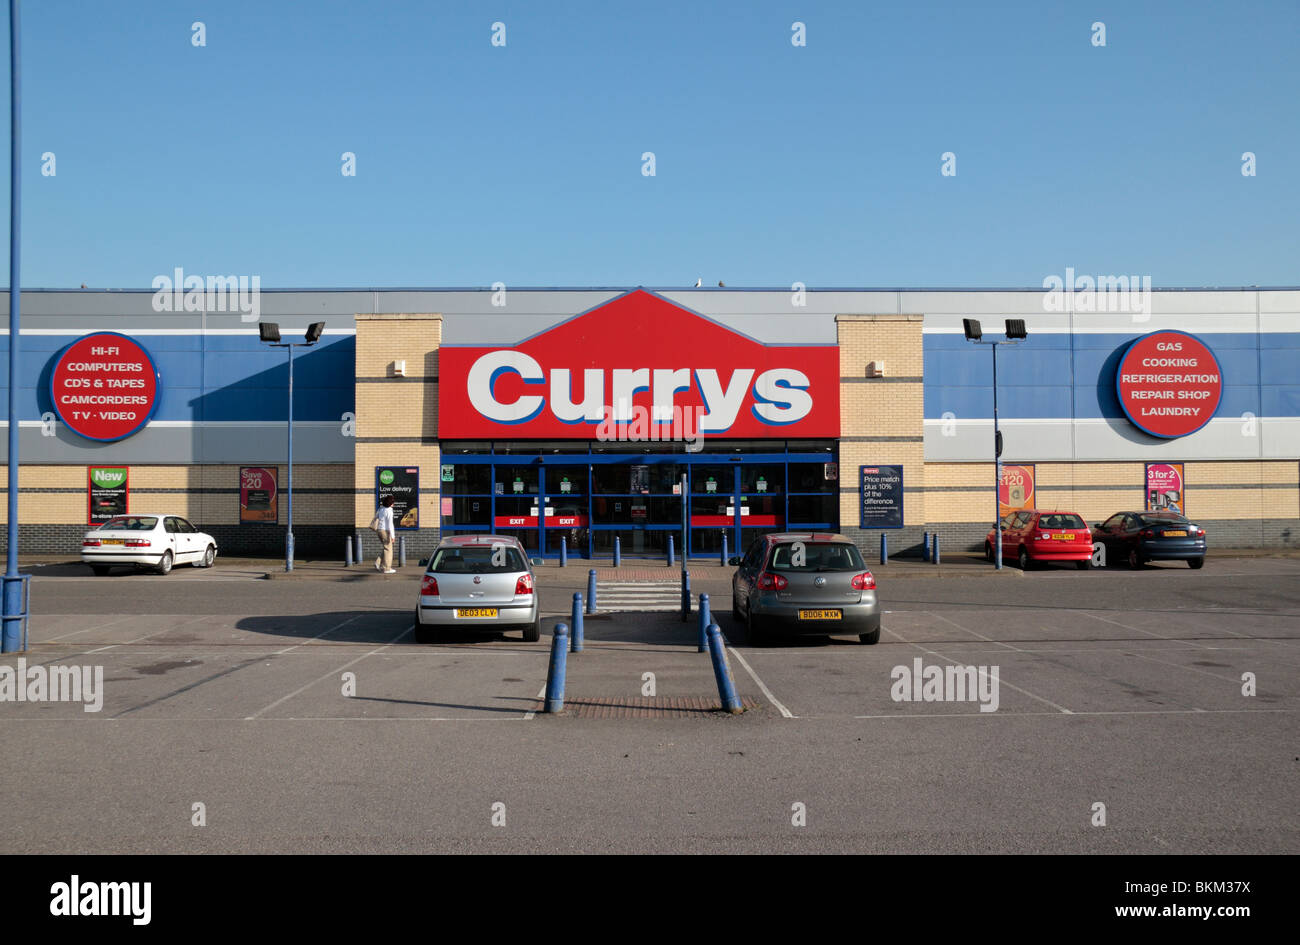 Car park and front entrance to the Currys electrical shop/warehouse, Great West Road, Brentford, Middx, UK Apr 2010 Stock Photo